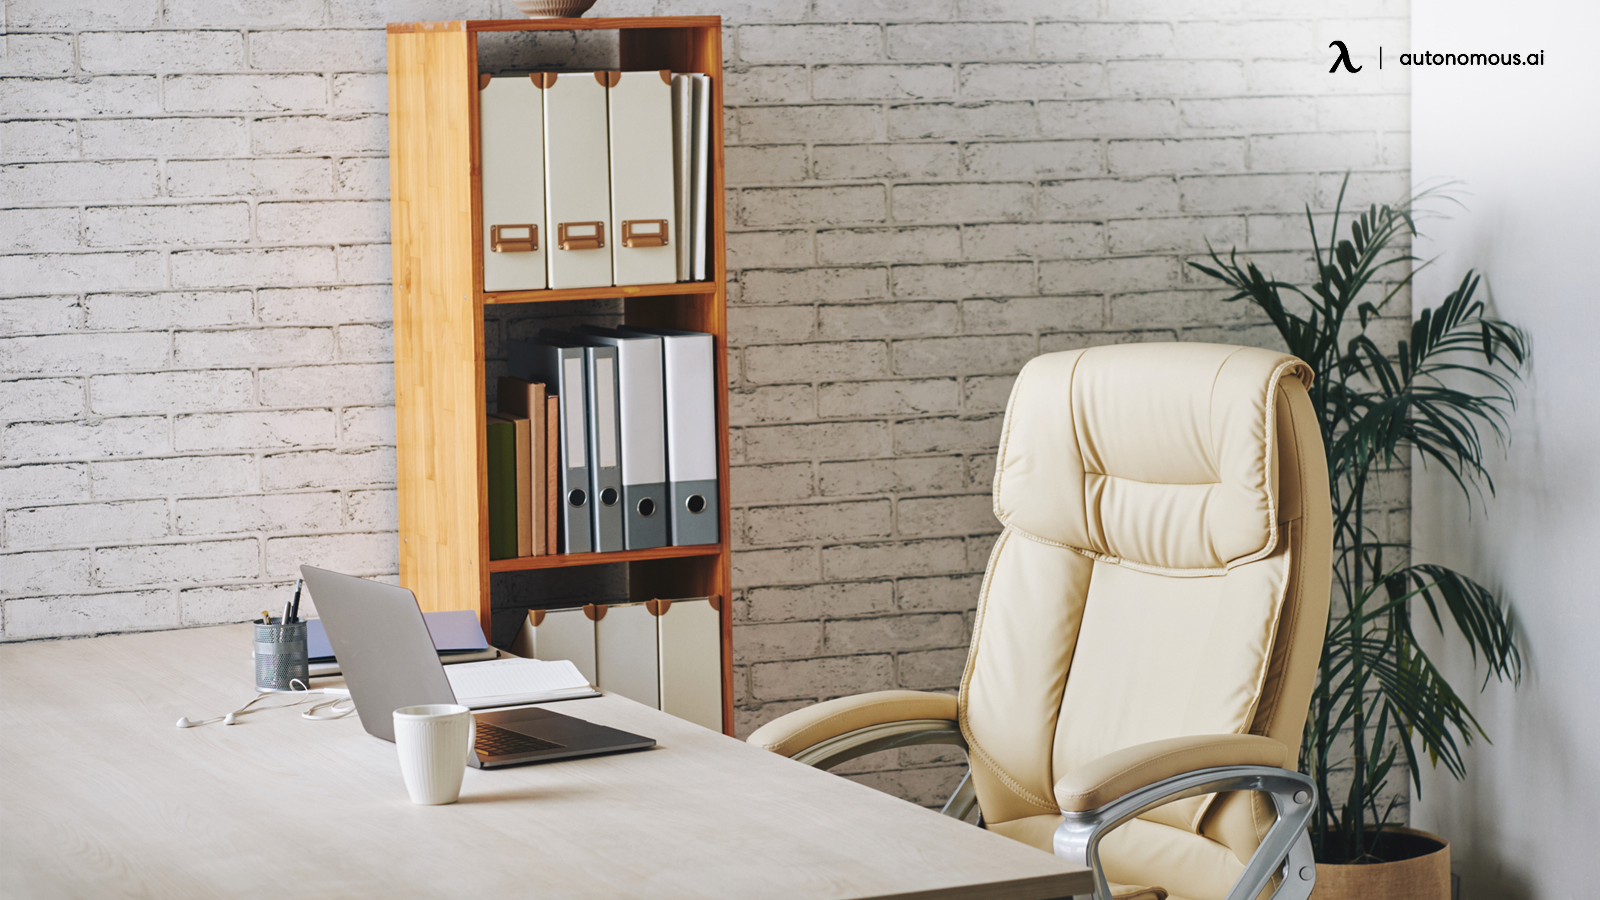 15 Easy Ways and Ideas to Deodorize Your Office Chair